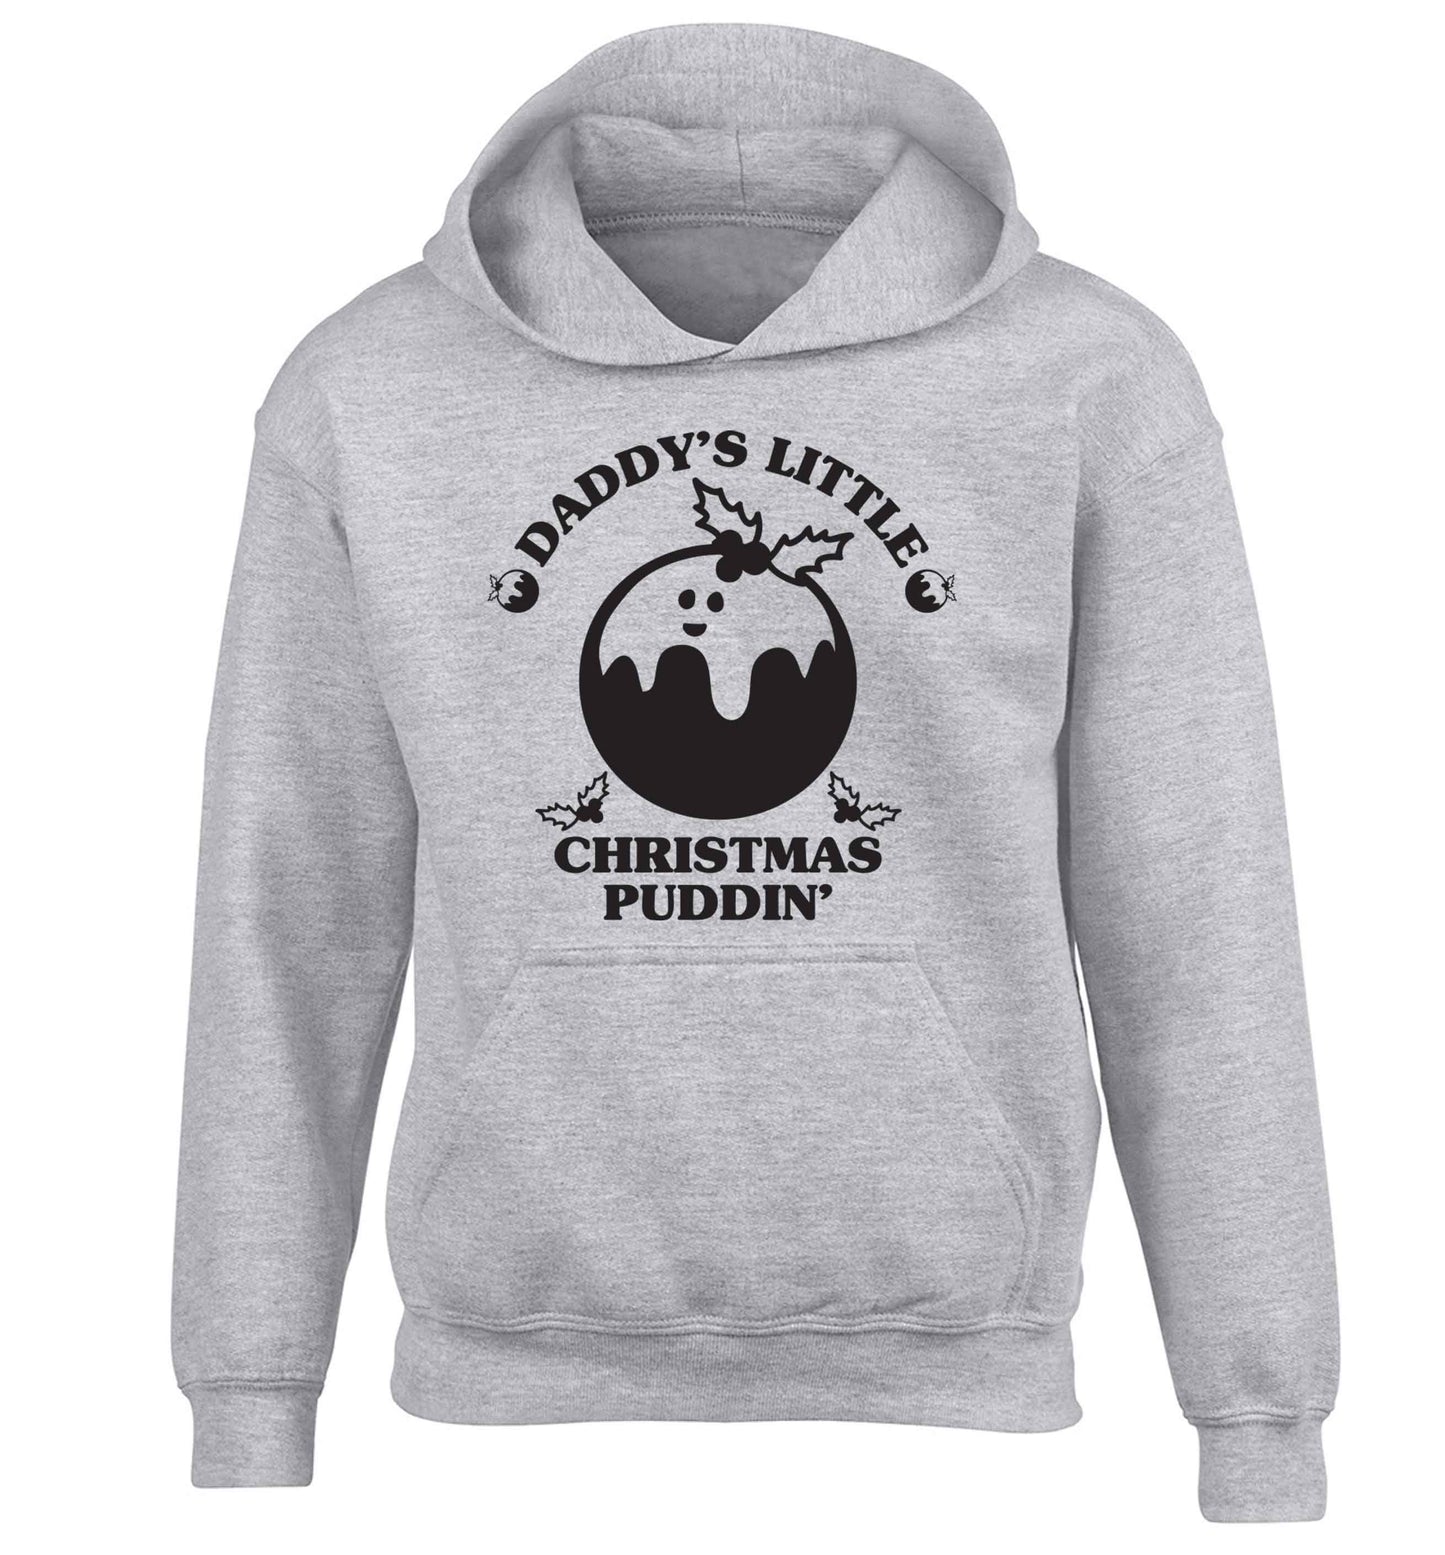 Daddy's little Christmas puddin' children's grey hoodie 12-13 Years